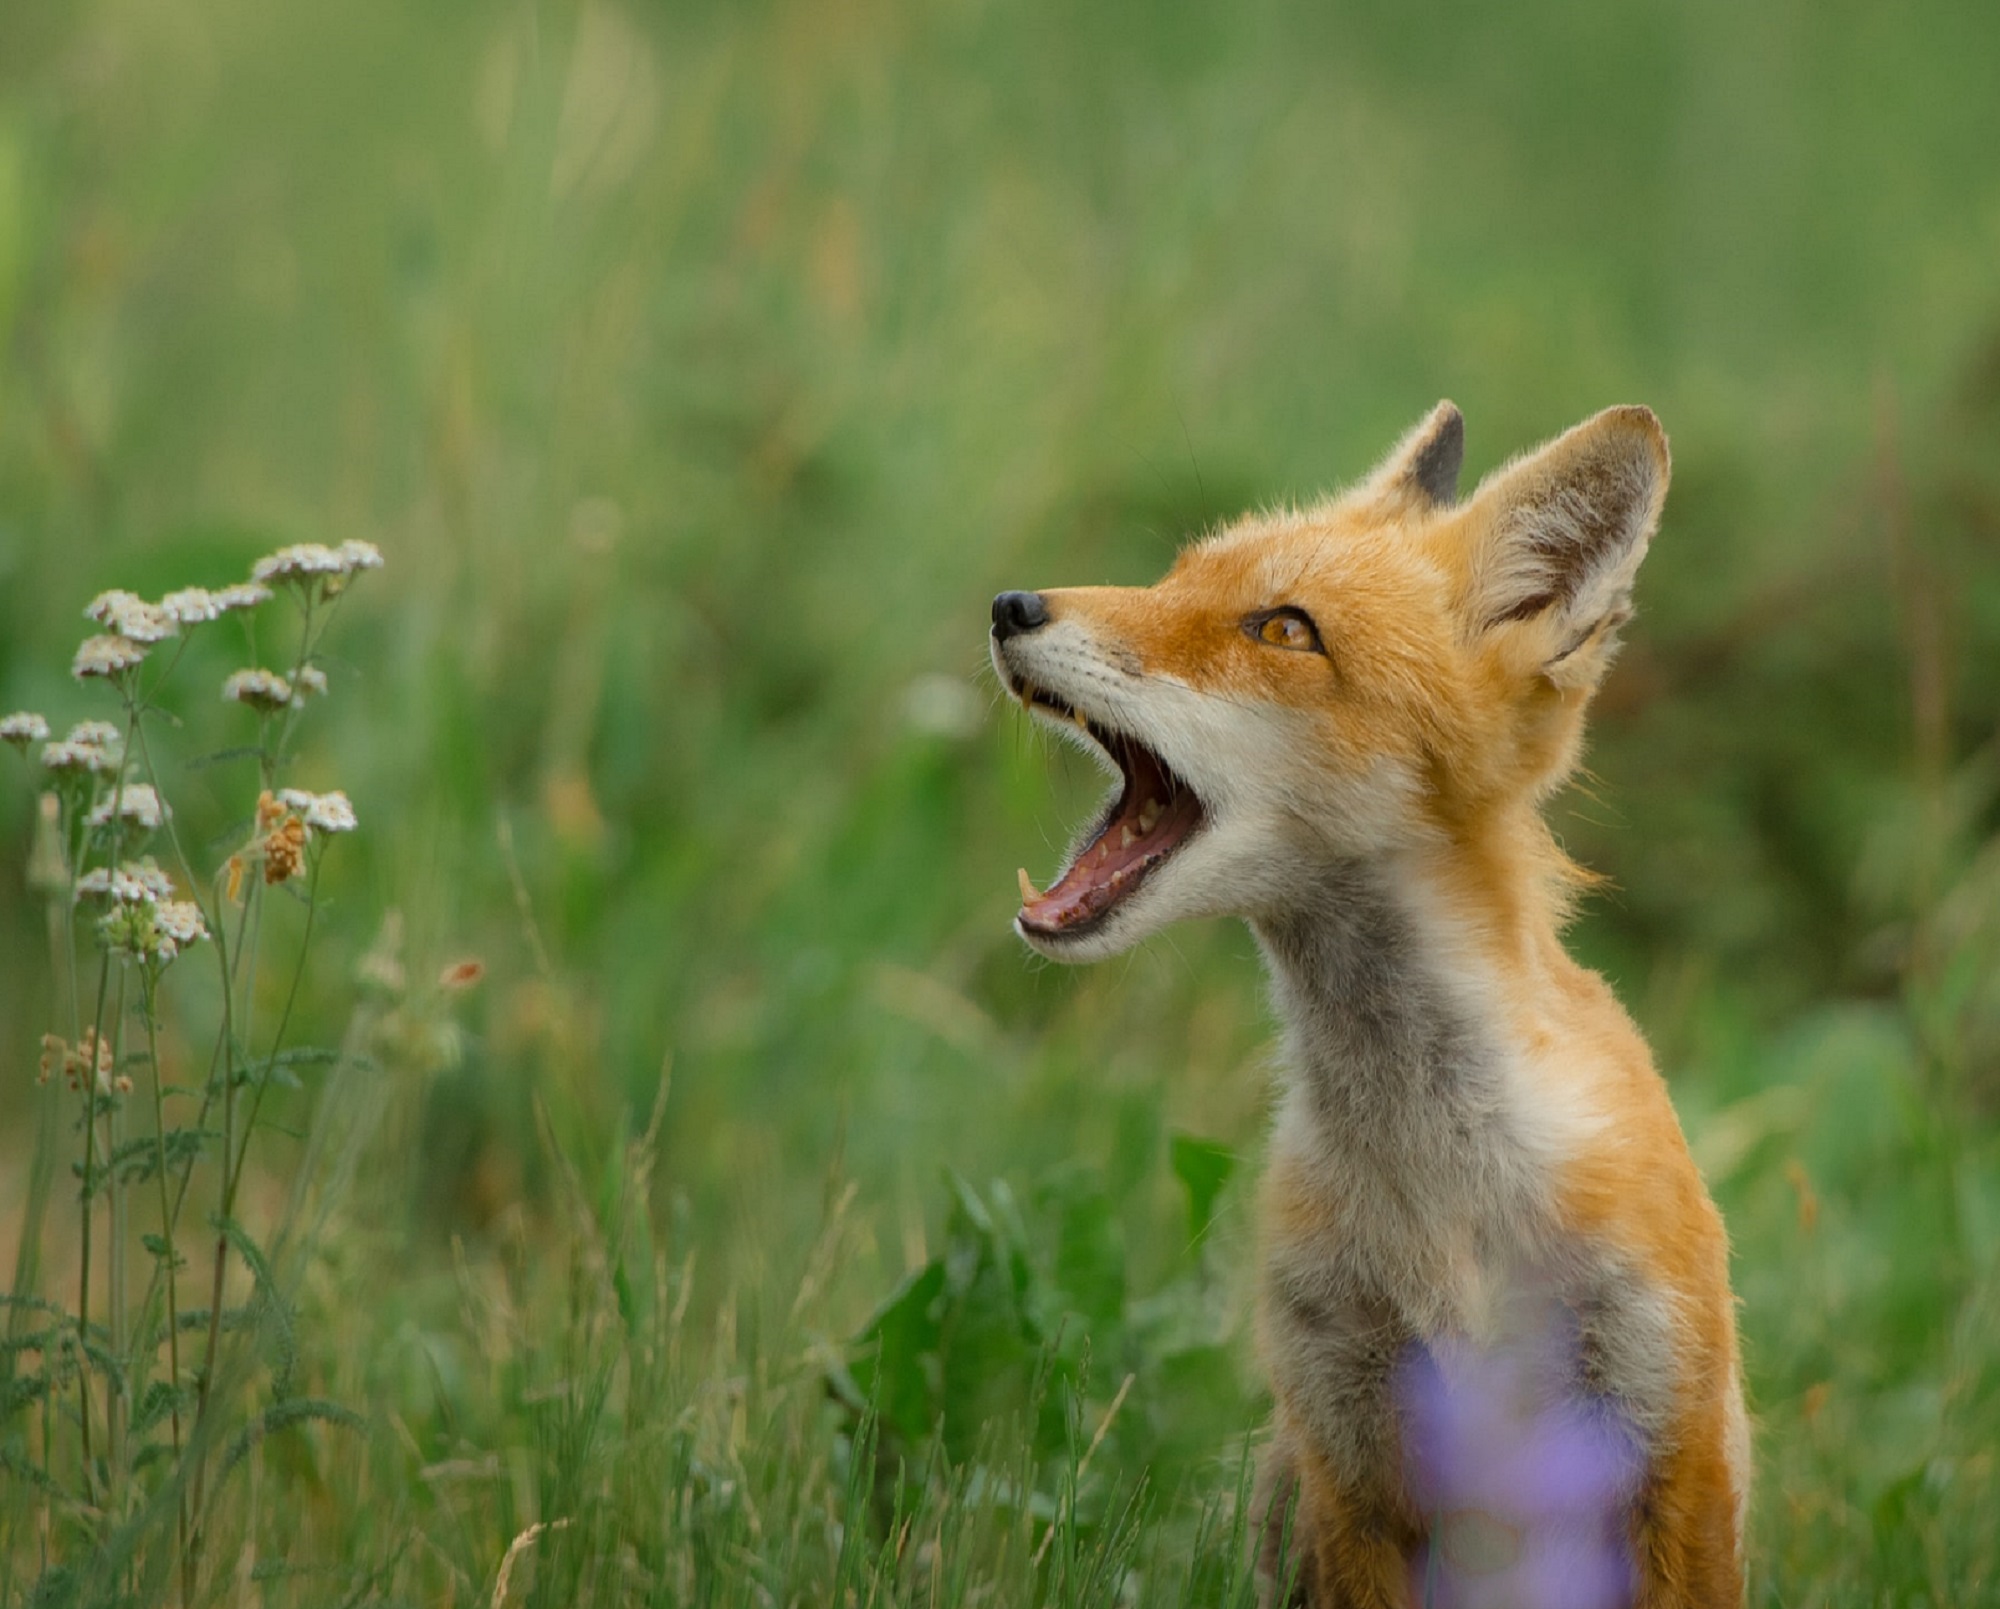 A baby red fox with its mouth open in a grassy field